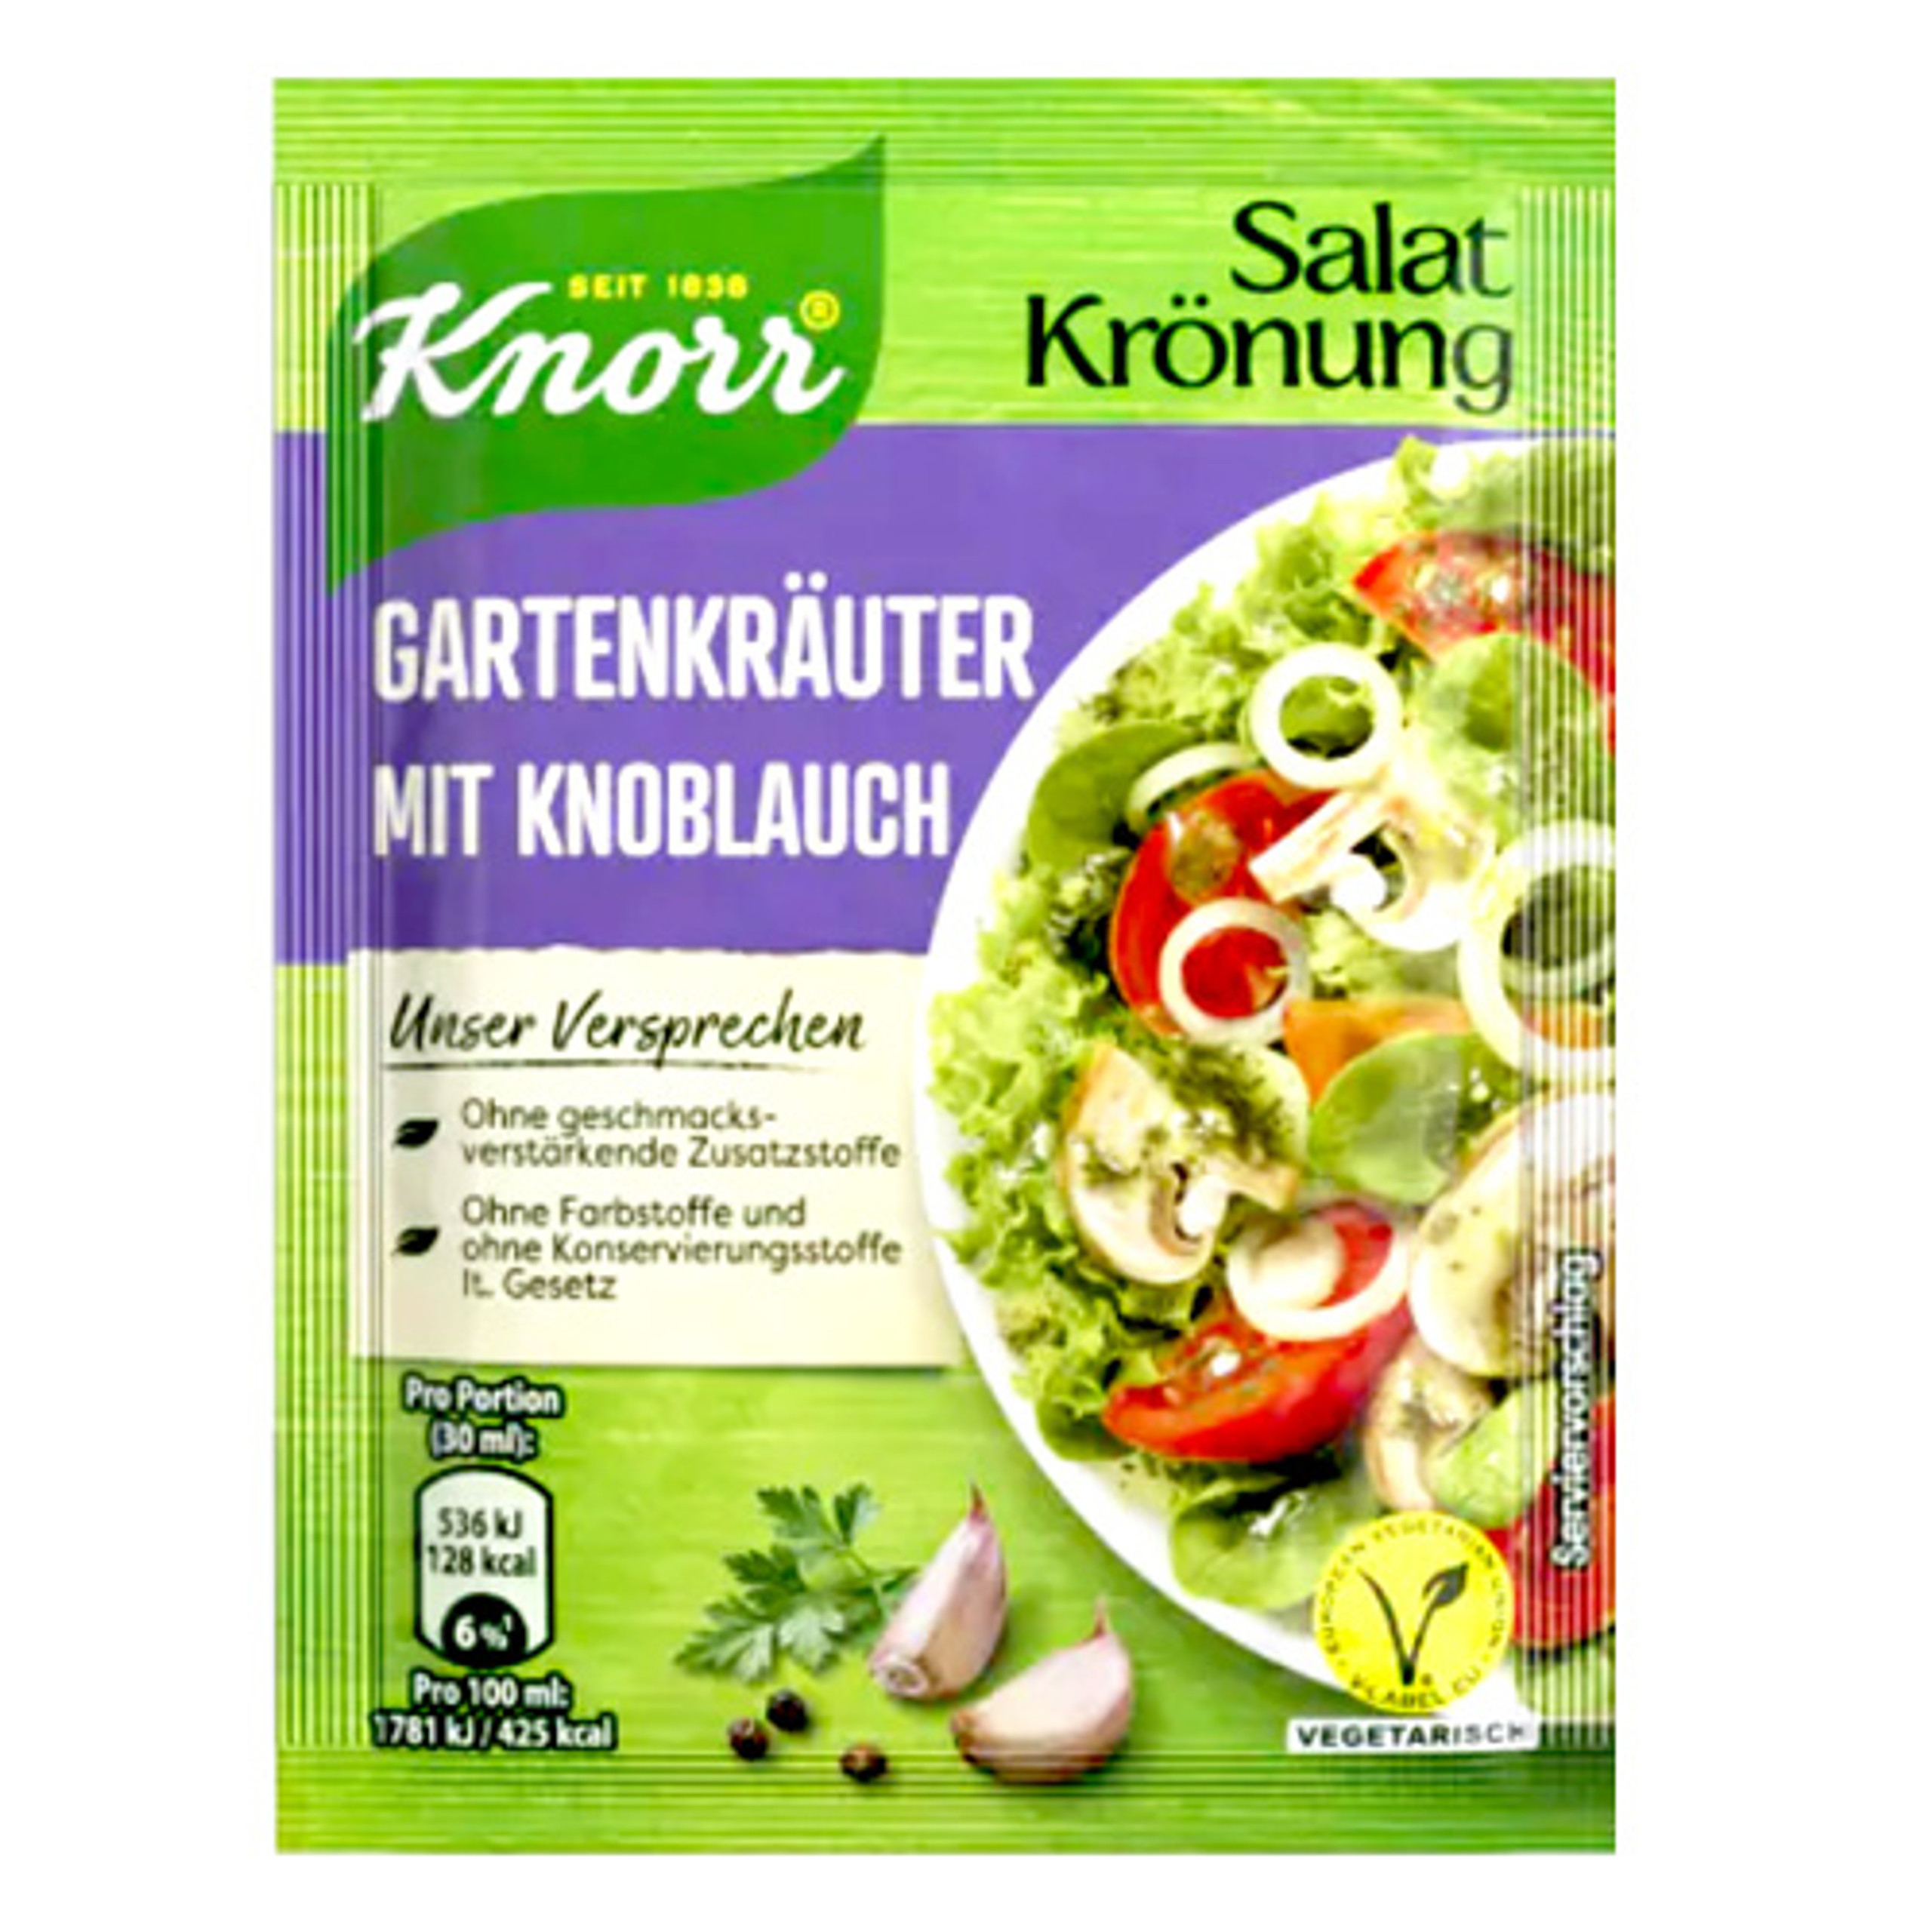 Knorr Products - The Taste of Germany